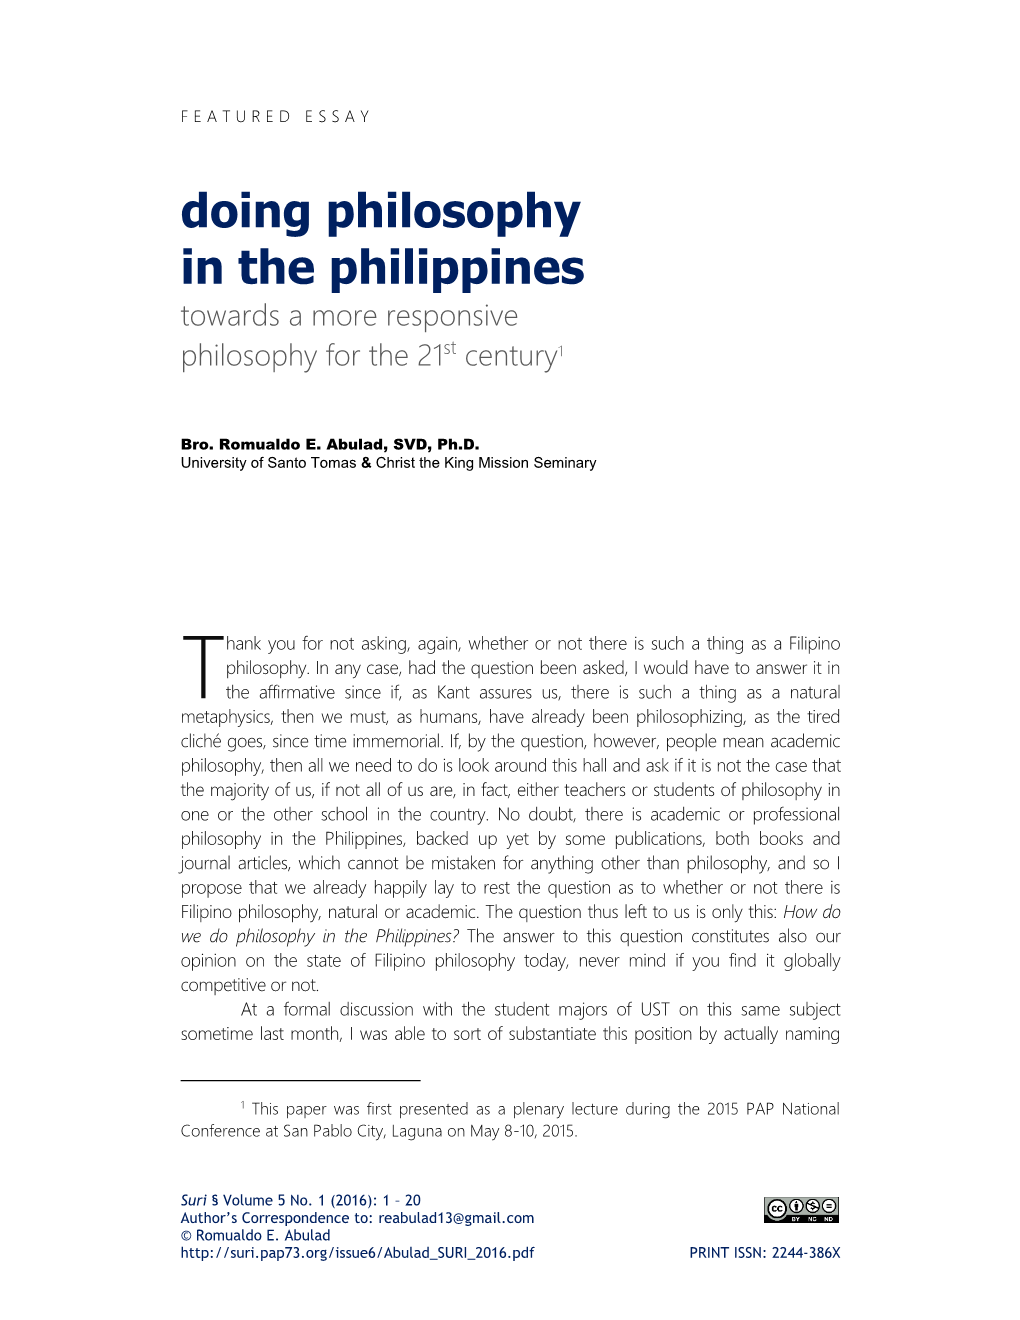 Doing Philosophy in the Philippines Towards a More Responsive Philosophy for the 21St Century1